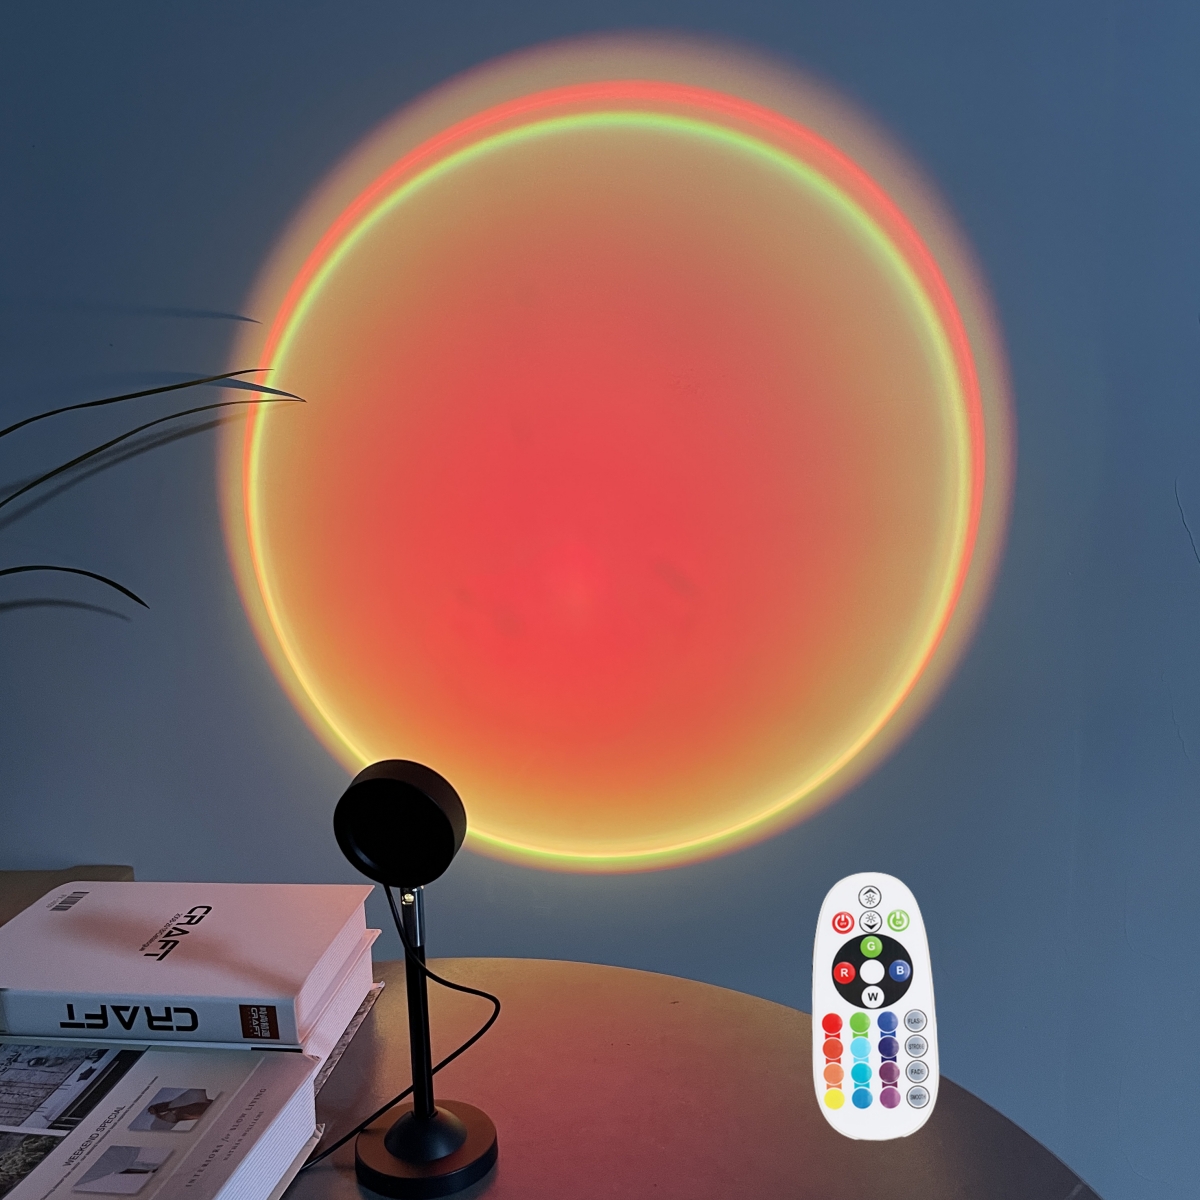 Transform Your Room with 16 Color-Changing LED Sunset Projection Lights!